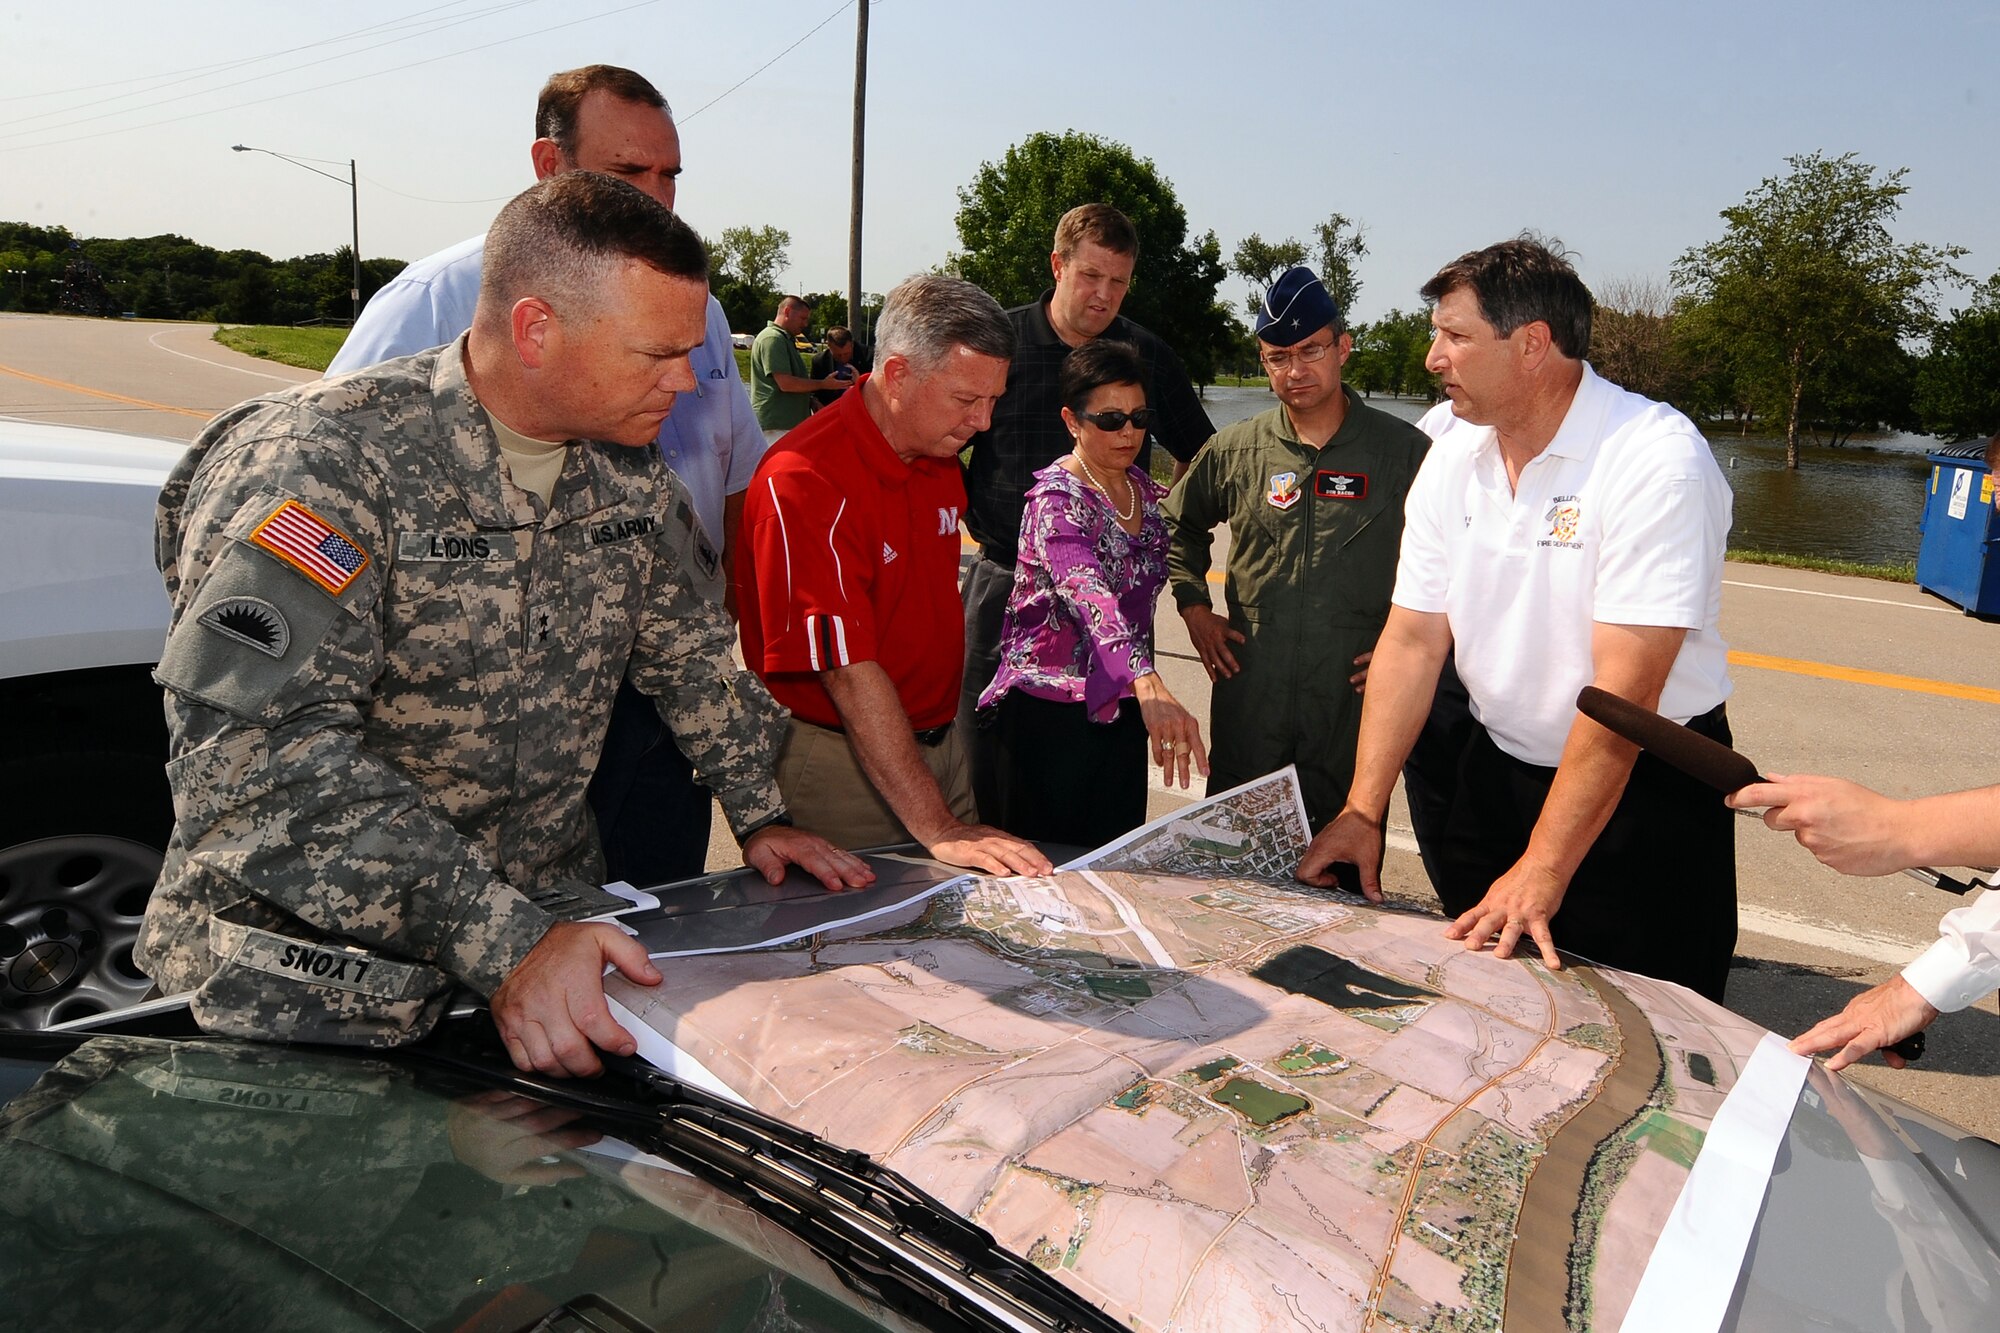 OFFUTT AIR FORCE BASE, Neb. - Army Corp of Engineers Maj. Gen. Judd Lyons, Governor Dave Heineman, Bellevue Mayor Rita Sanders, 55th Wing commander Brig. Gen. Donald Bacon and other officials look over a satellite map of the Missouri river and the corresponding metropolitan areas that could see heavy damages if the levee's were to fail at Hayworth Park in Bellevue. Preparation for the increased water levels from the Missouri River is crucial in how Offutt adapts to continuing its mission despite the record water flow.  U.S. Air Force Photo by Josh Plueger.